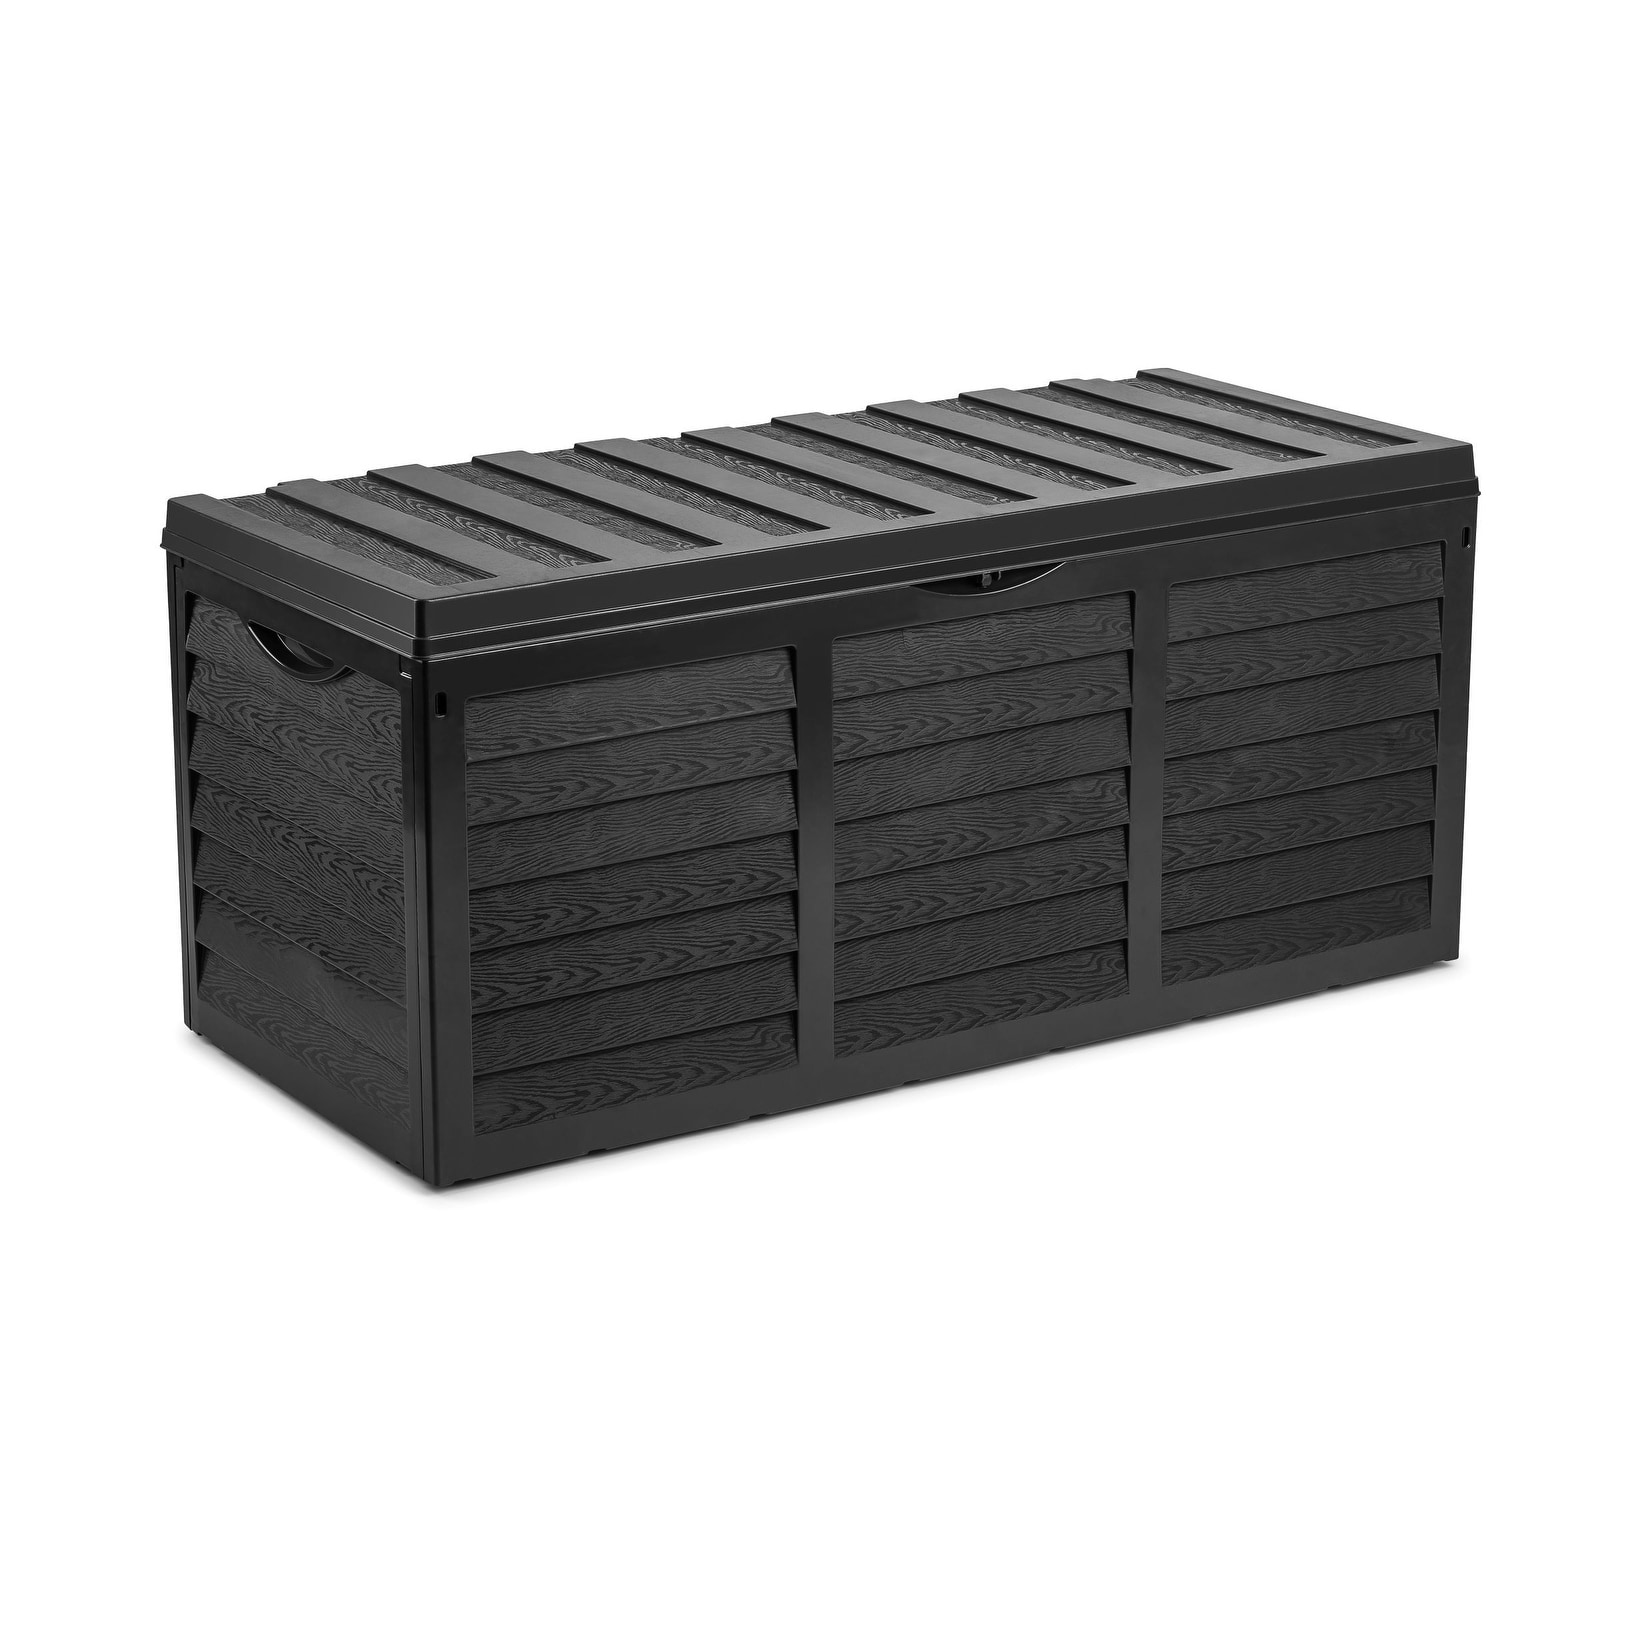 Rustic State 84 Gallon Water Resistant Outdoor Storage Box - Black